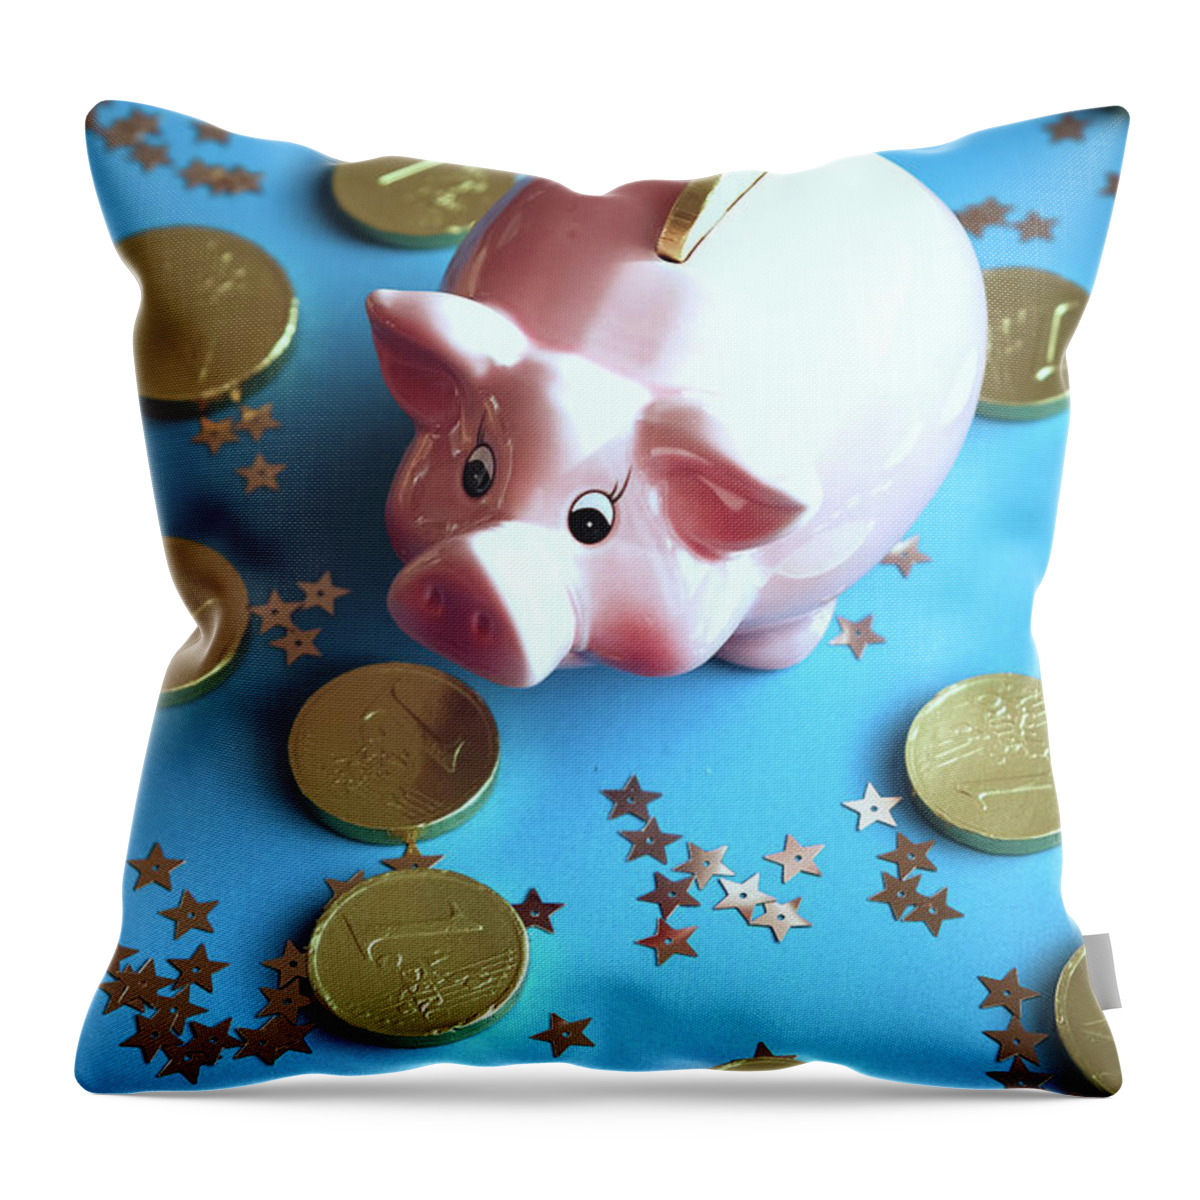 Piggy Bank On The Background With The Chocoladen Coins Bymarina Usmanskaya Throw Pillow featuring the photograph Piggy bank on the background with the chocoladen coins by Marina Usmanskaya